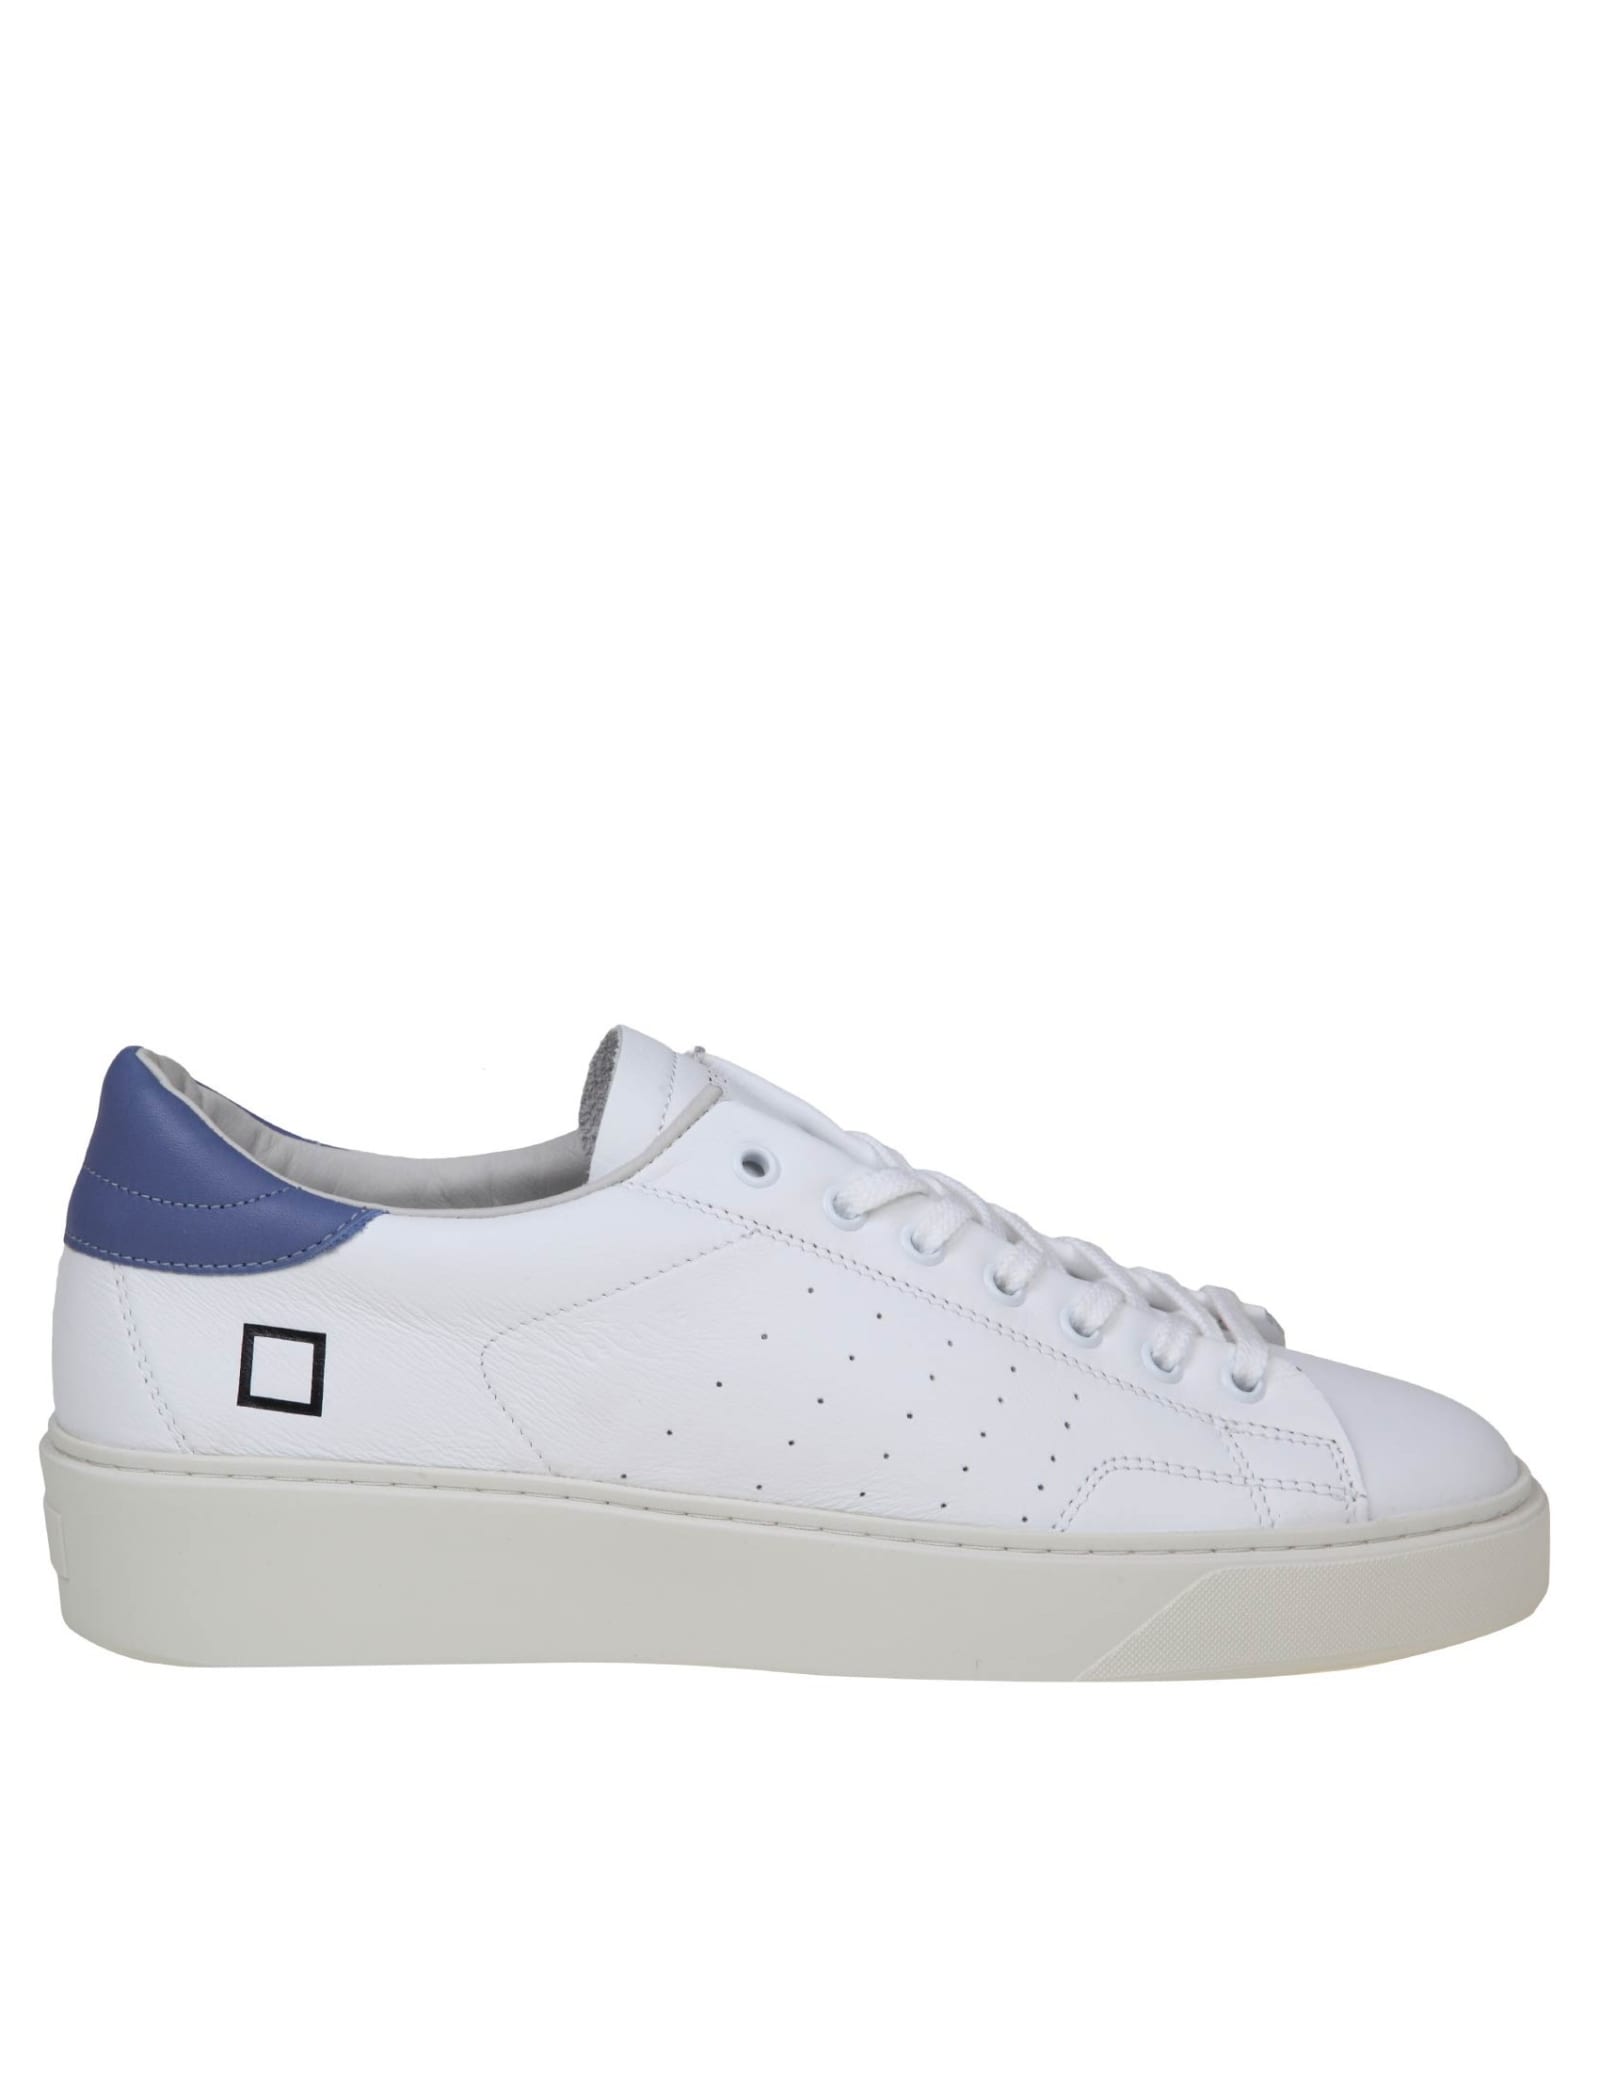 DATE SNEAKERS LEVANTE IN WHITE/BLUE LEATHER